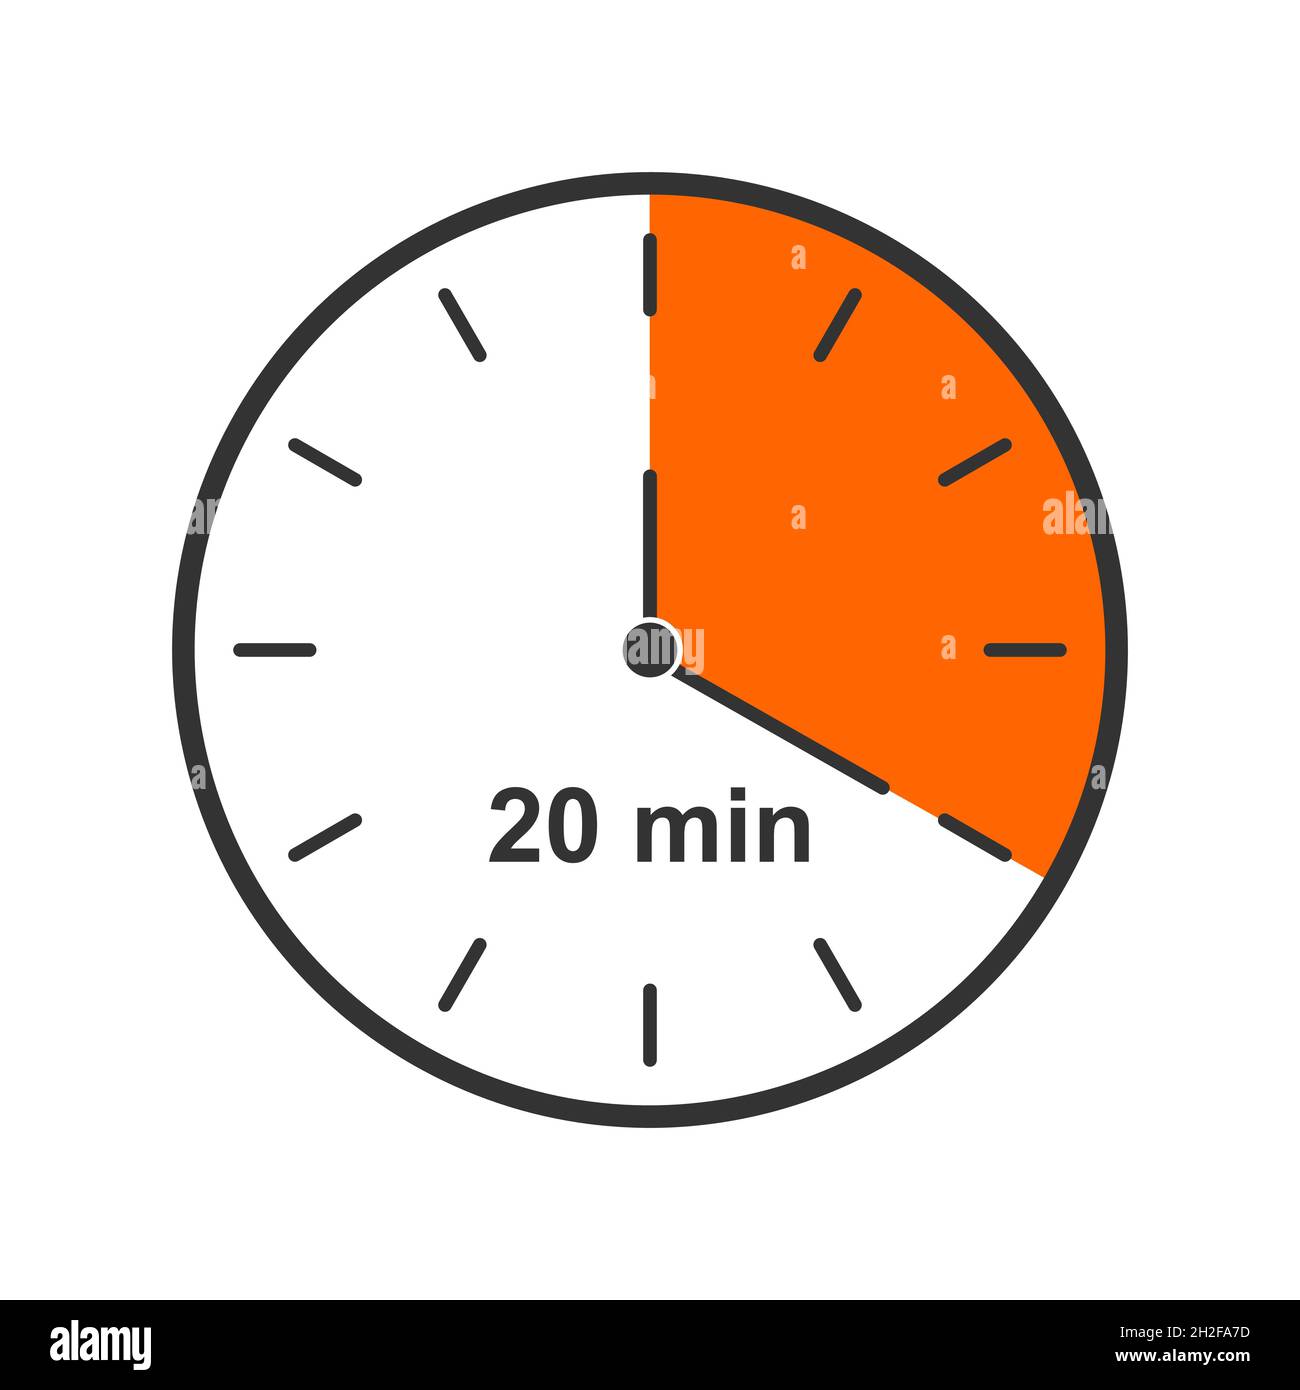 Clock icon with 20 minute time interval. Countdown timer or stopwatch symbol. Infographic element for cooking or sport game isolated on white background. Vector flat illustration. Stock Vector